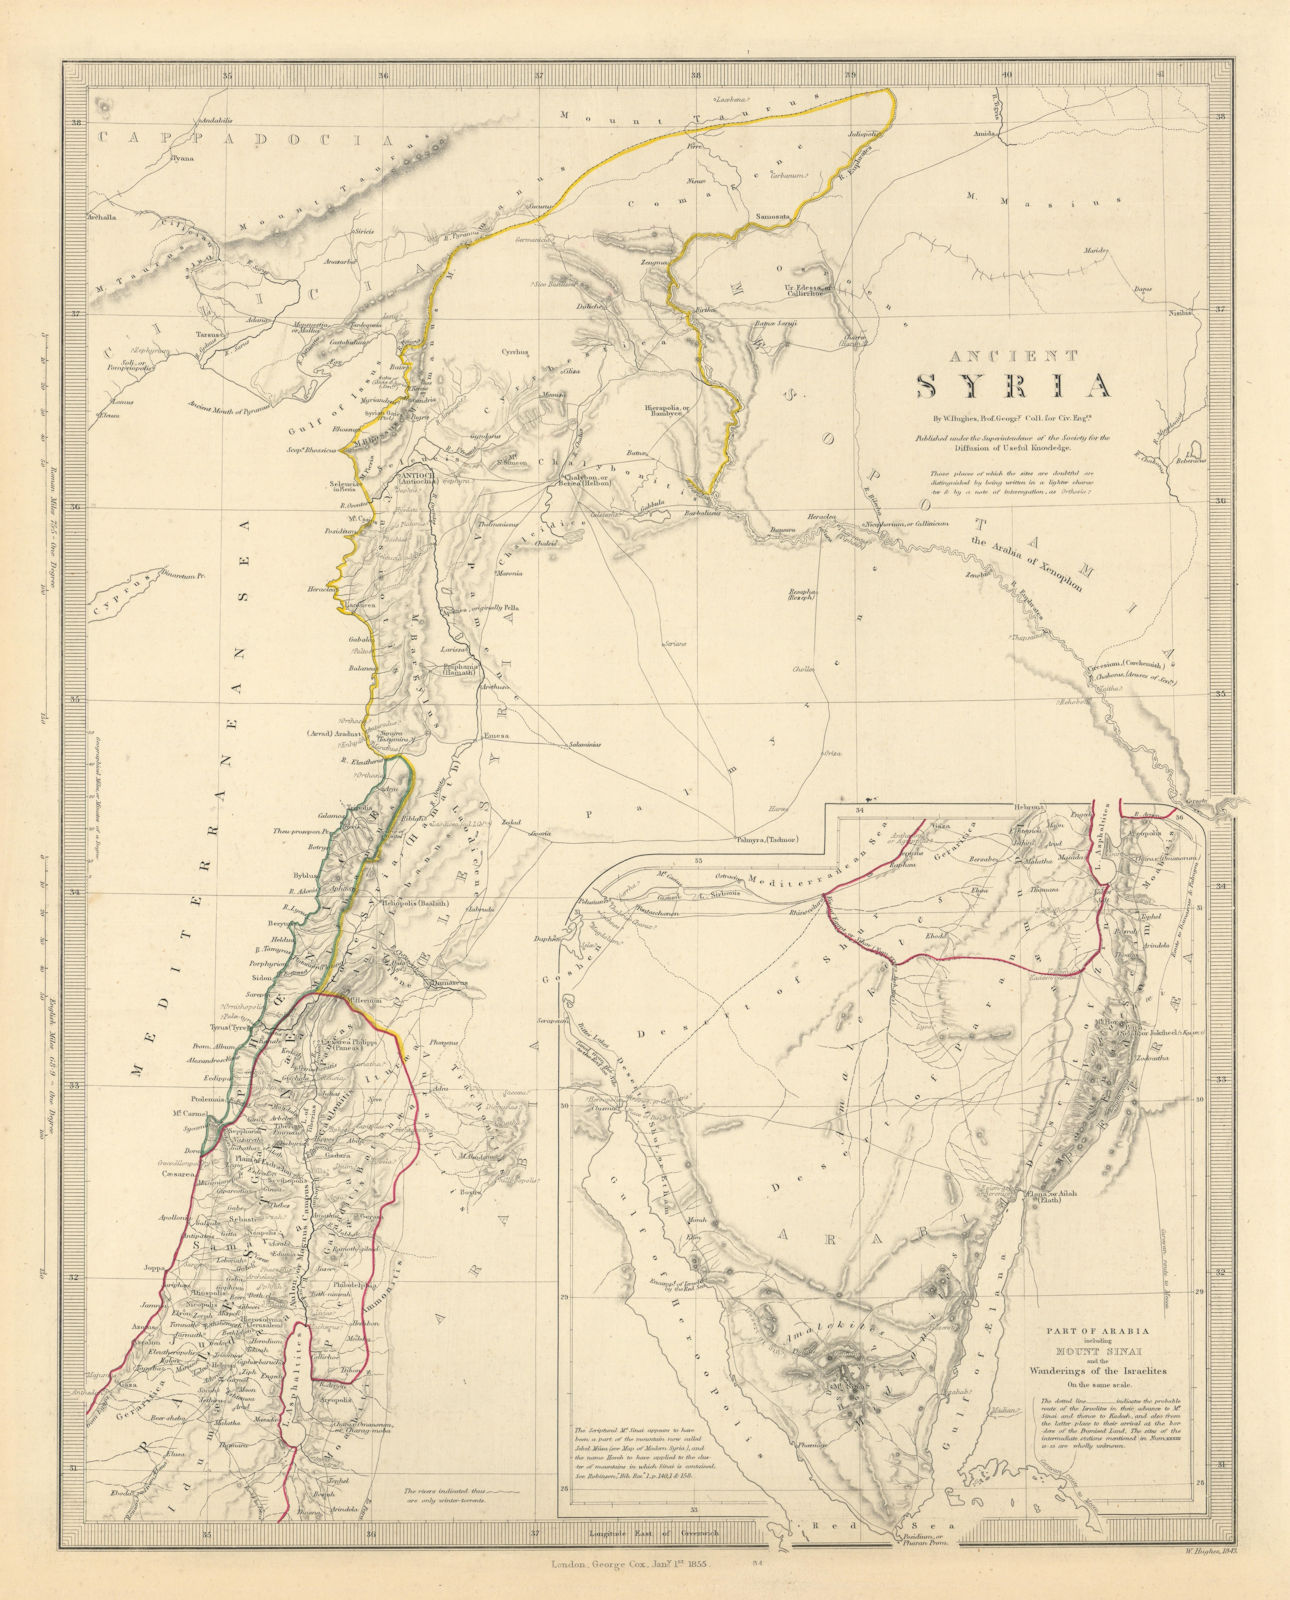 Associate Product ANCIENT SYRIA. Levant; Sinai. wanderings of the Israelites. SDUK 1855 old map